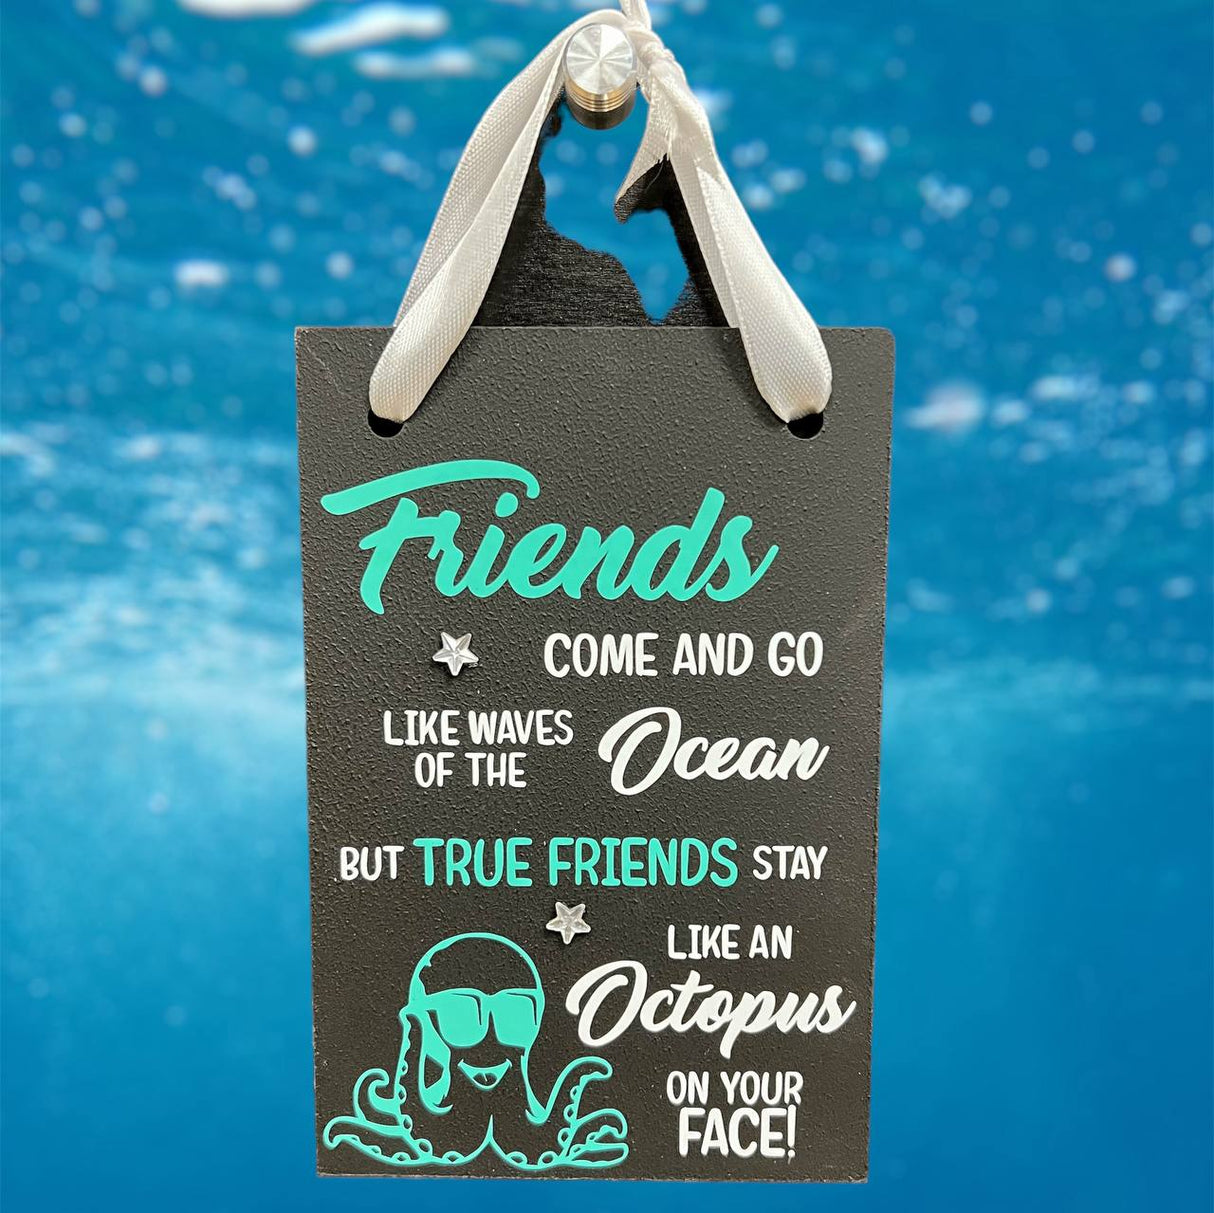 Friends - Octopus on your face!